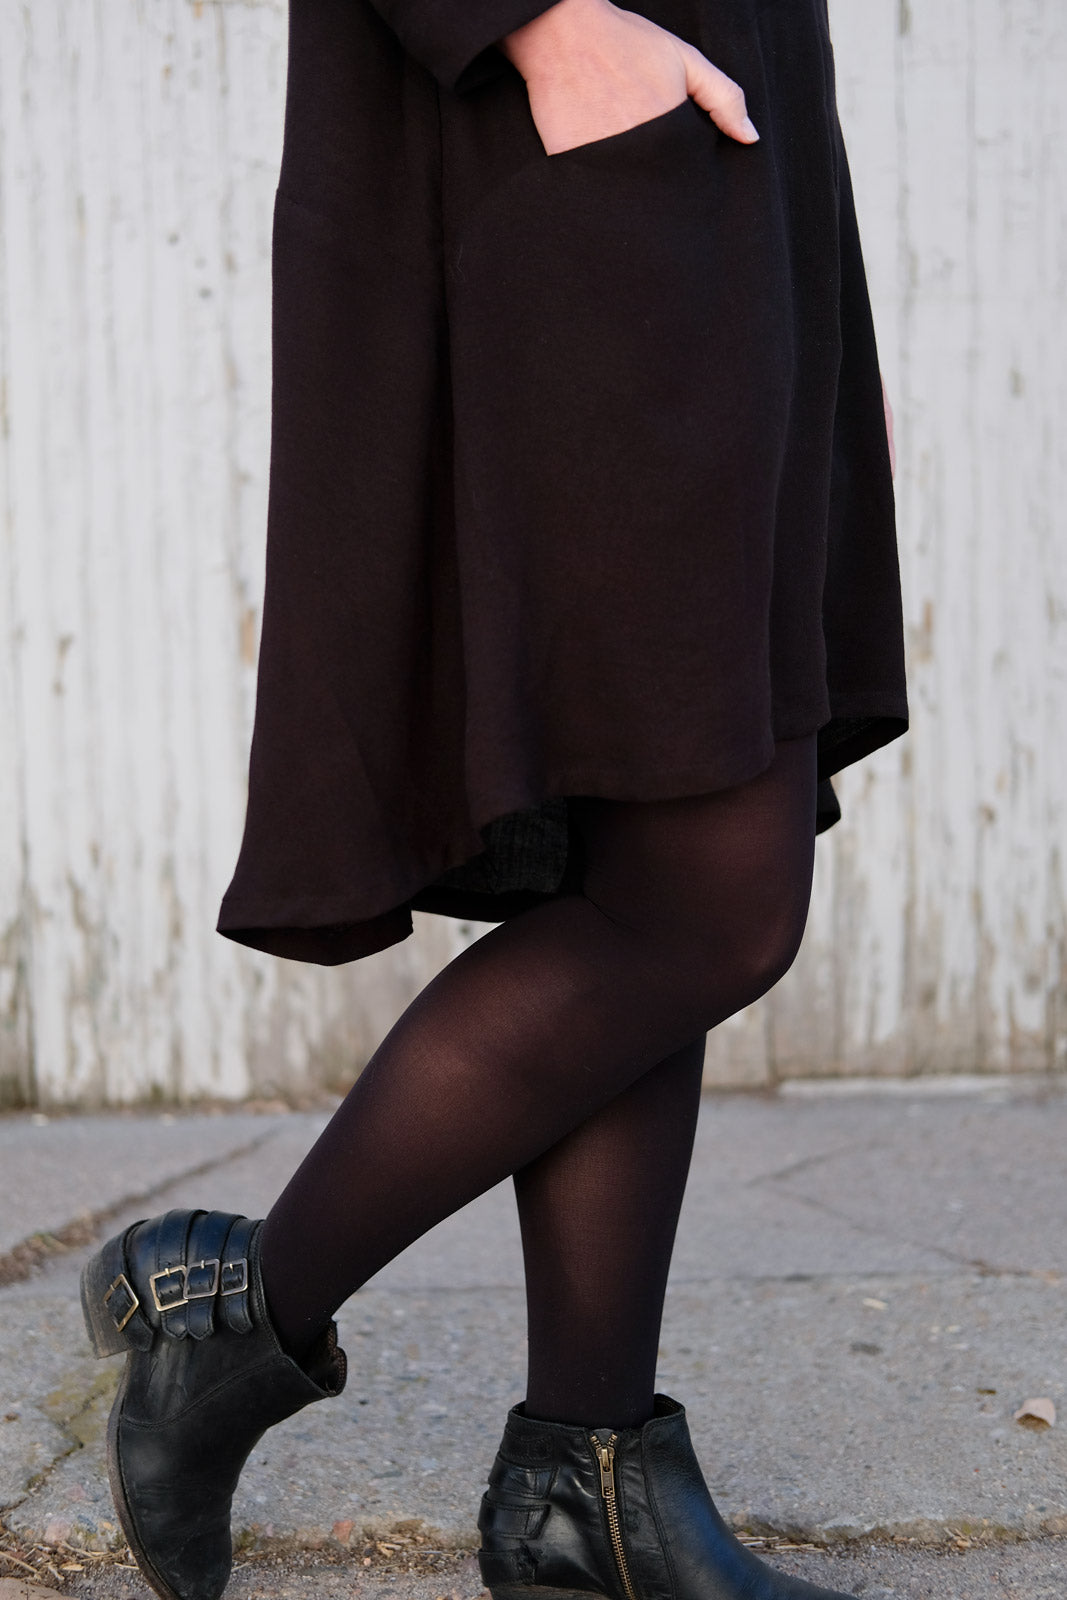 Jamie in her black crepe rayon Farrow from the waist down